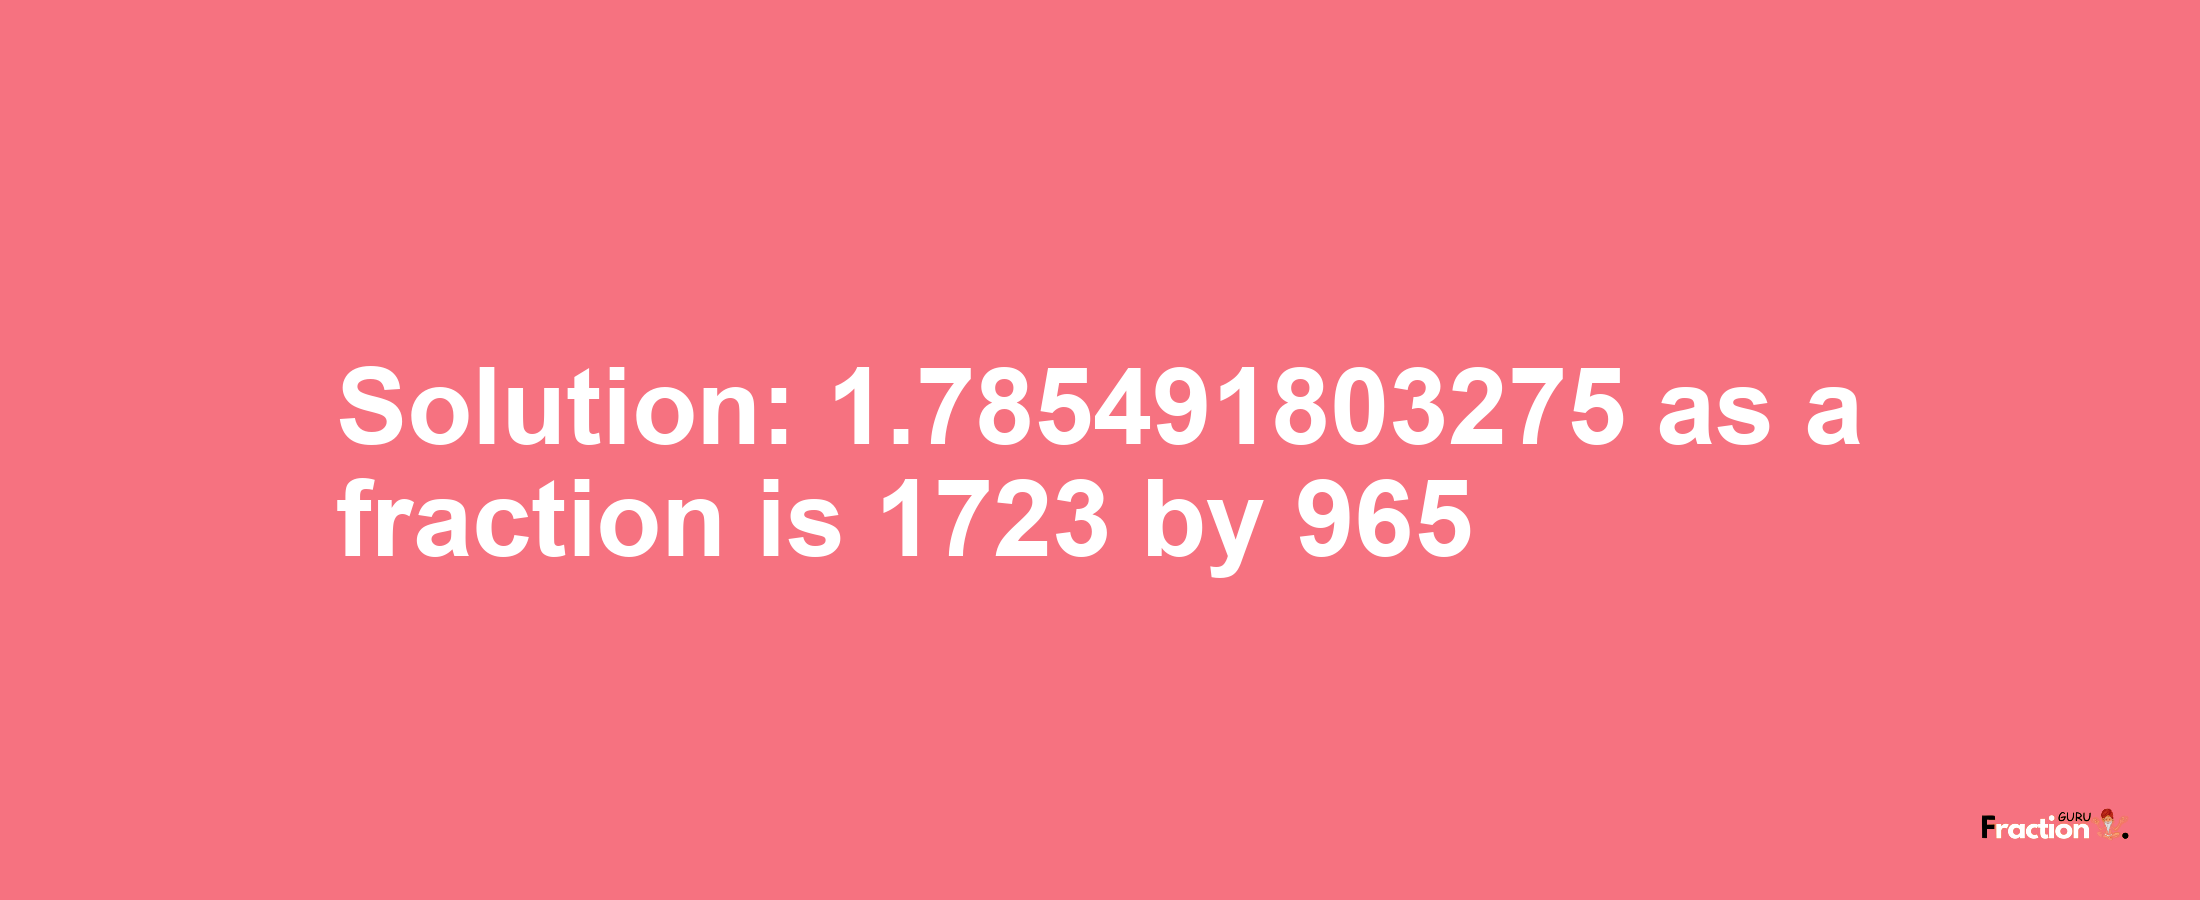 Solution:1.785491803275 as a fraction is 1723/965